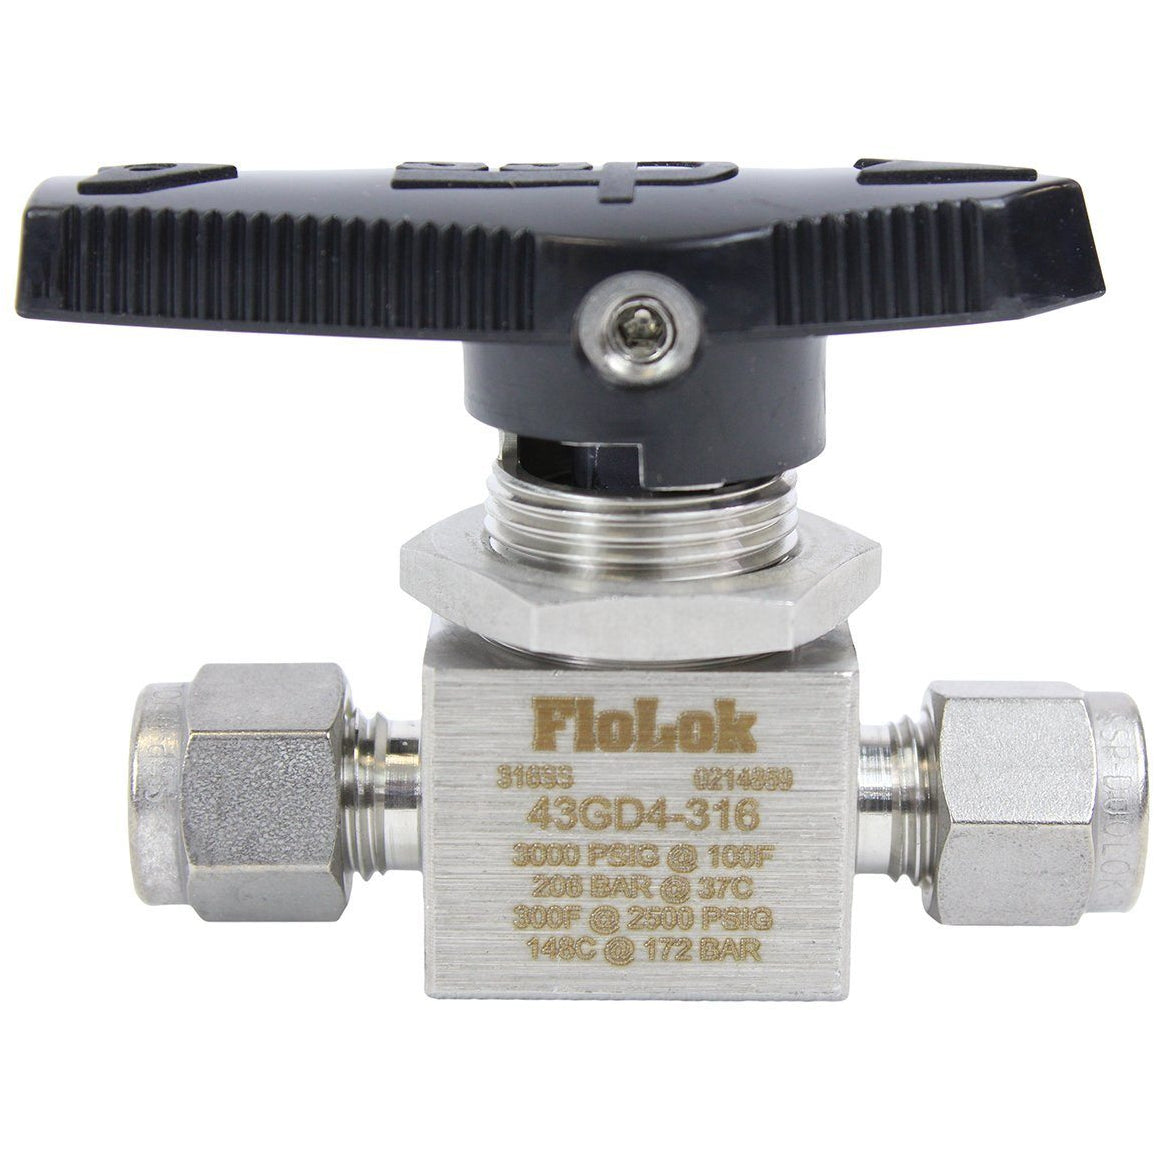 SSP - 2 Way Ball Valve - Fractional Tube Fitting Shop All Categories SSP Corporation 1/4-inch 